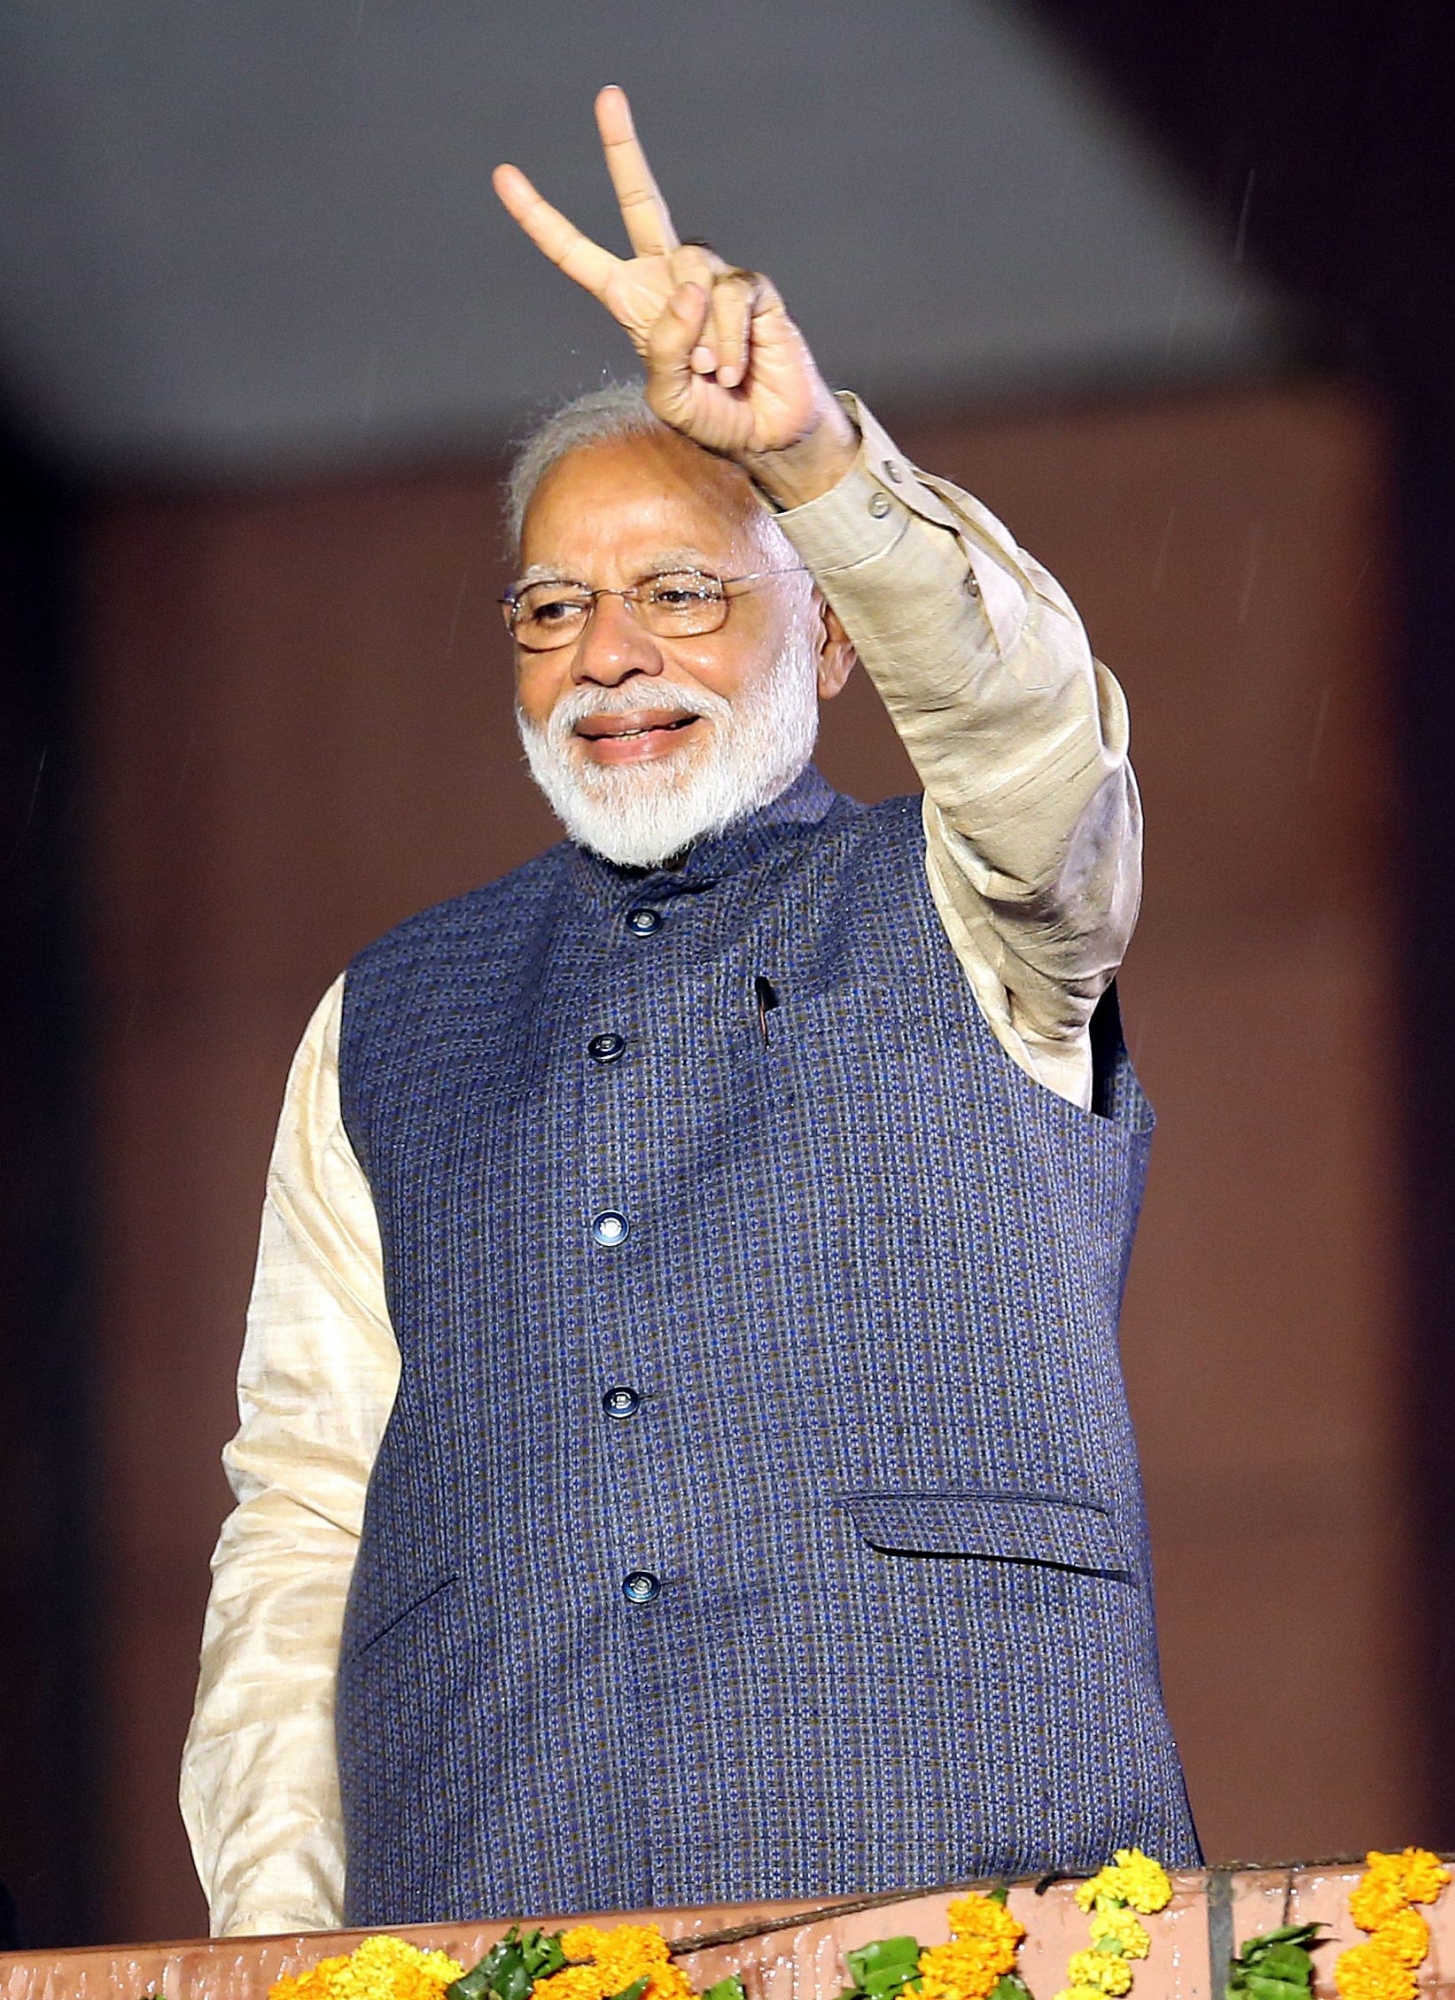 epa07594565  Bhartya Janta Party (BJP) leader and Indian Prime Minister Narendra Modi gestures a victory sign at the party headquarters in New Delhi, India, 23 May 2019. The Lok Sabha, the lower house of Parliament, elections, which began on 11 April 2019, is having the results tallied on 23 May. The Lok Sabha elections were held for 542 of the 543 lower house seats, and a party or alliance needs 272 seats to form a government. According to the polling Narendra Modi could retain the position of Prime Minister along with the Bhartya Janta Party (BJP).   EPA/HARISH TYAGI INDIA ELECTIONS